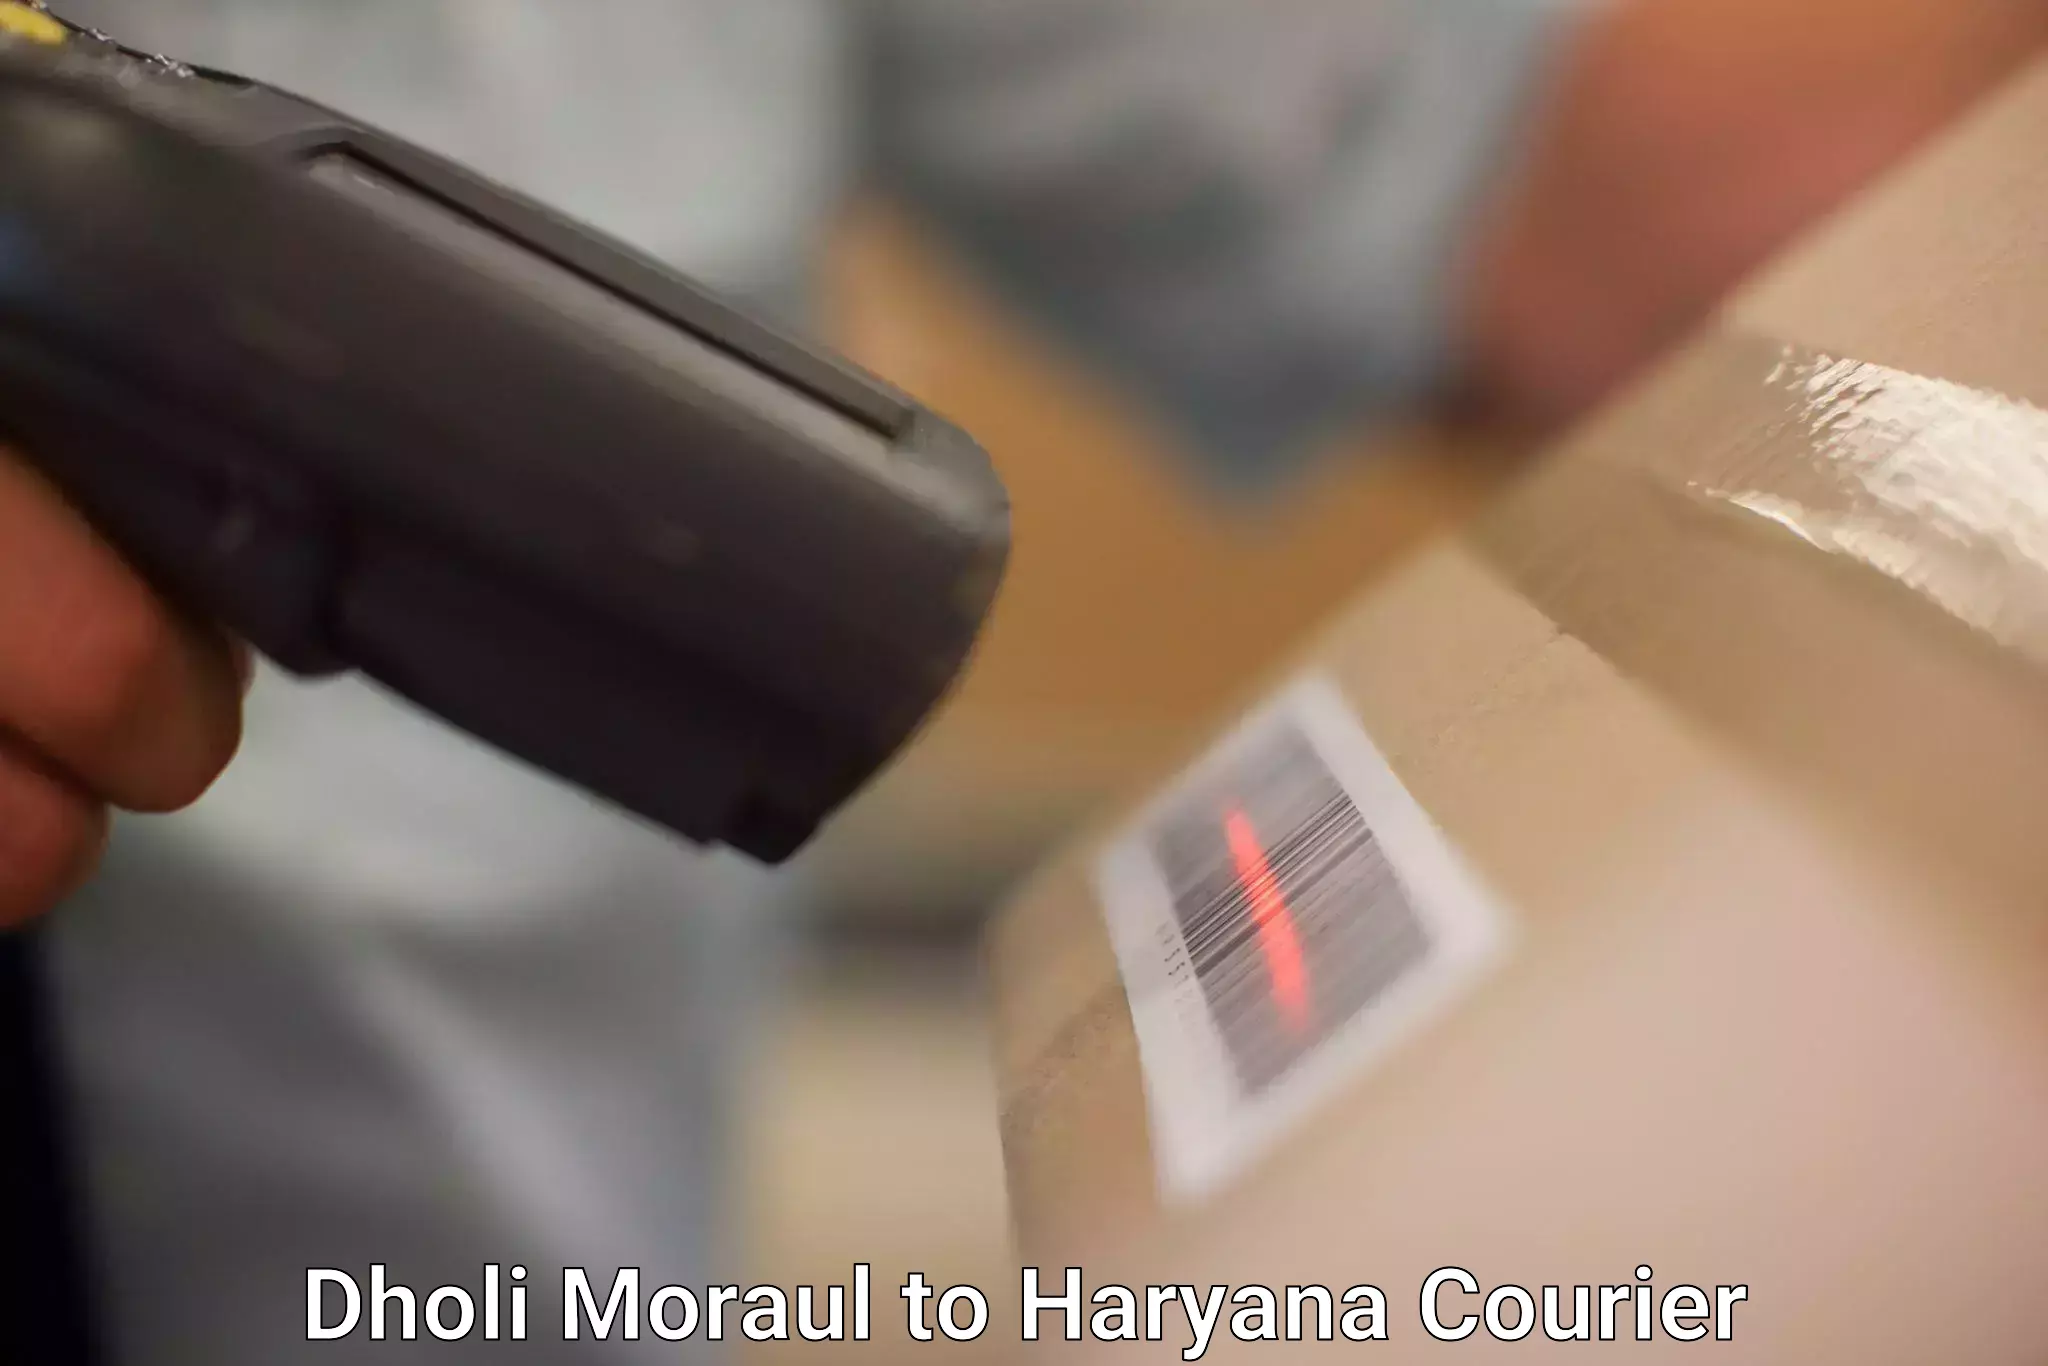 Fast shipping solutions Dholi Moraul to Fatehabad